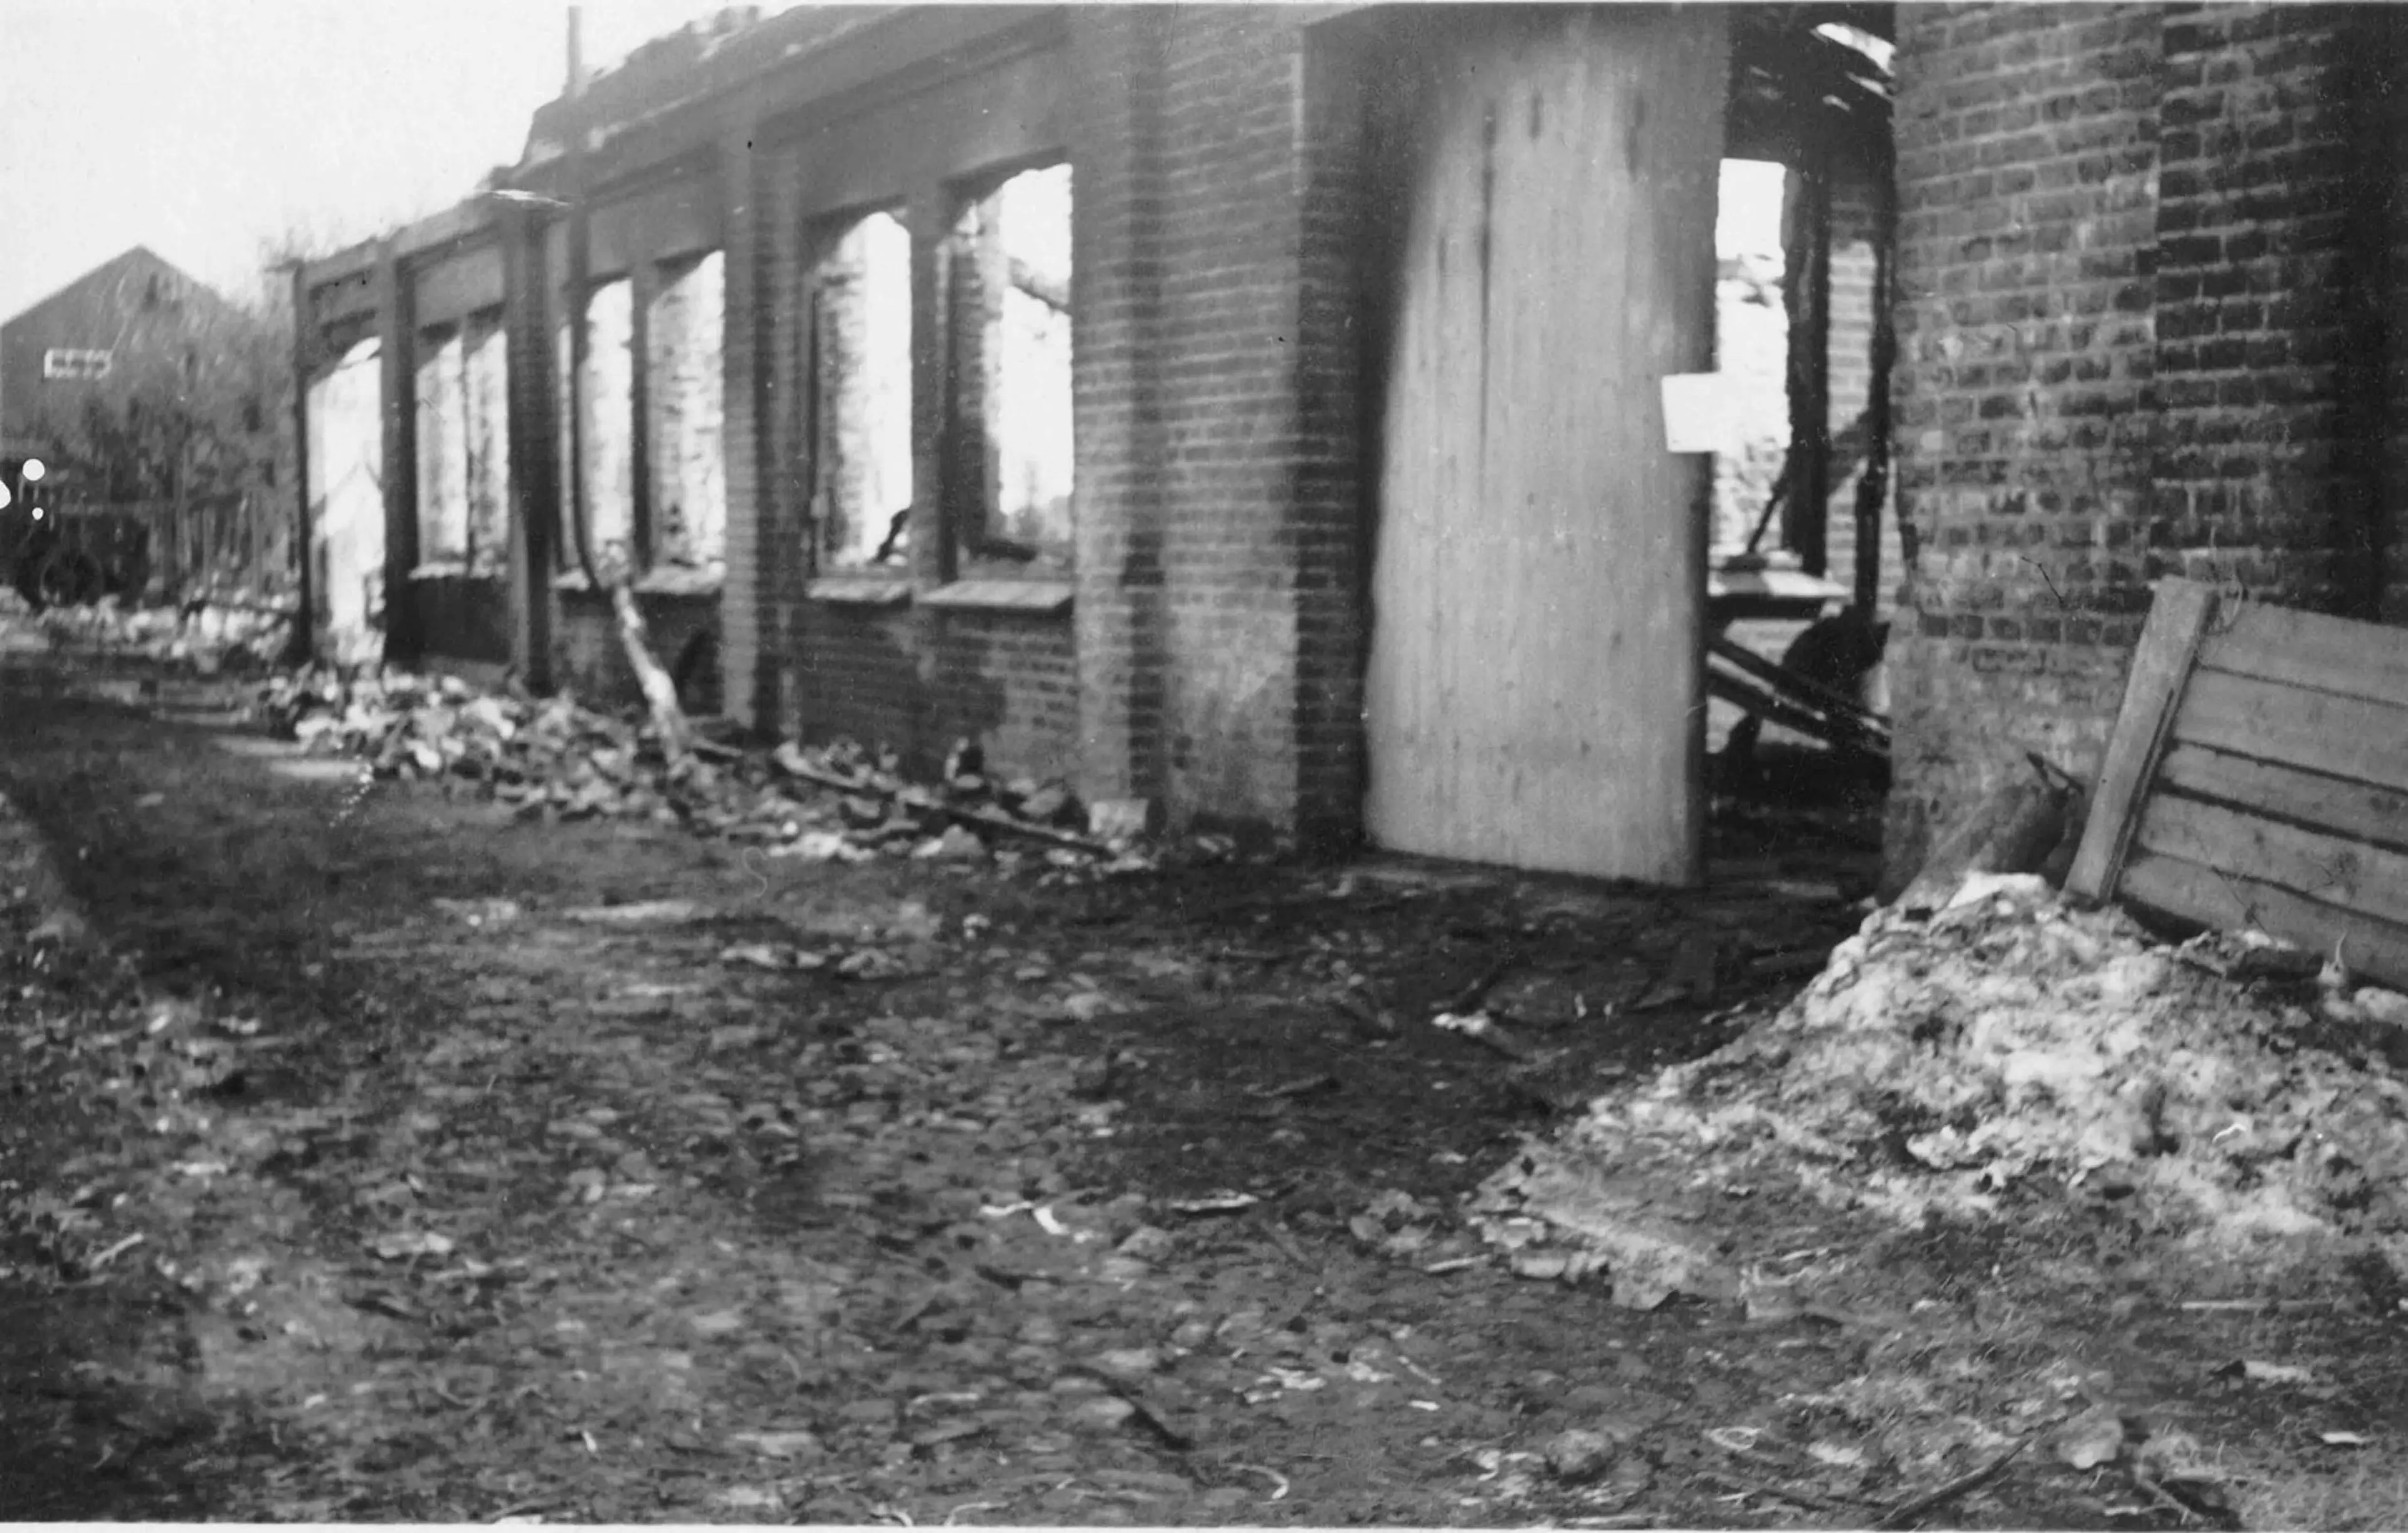 The wooden workshop destroyed by fire